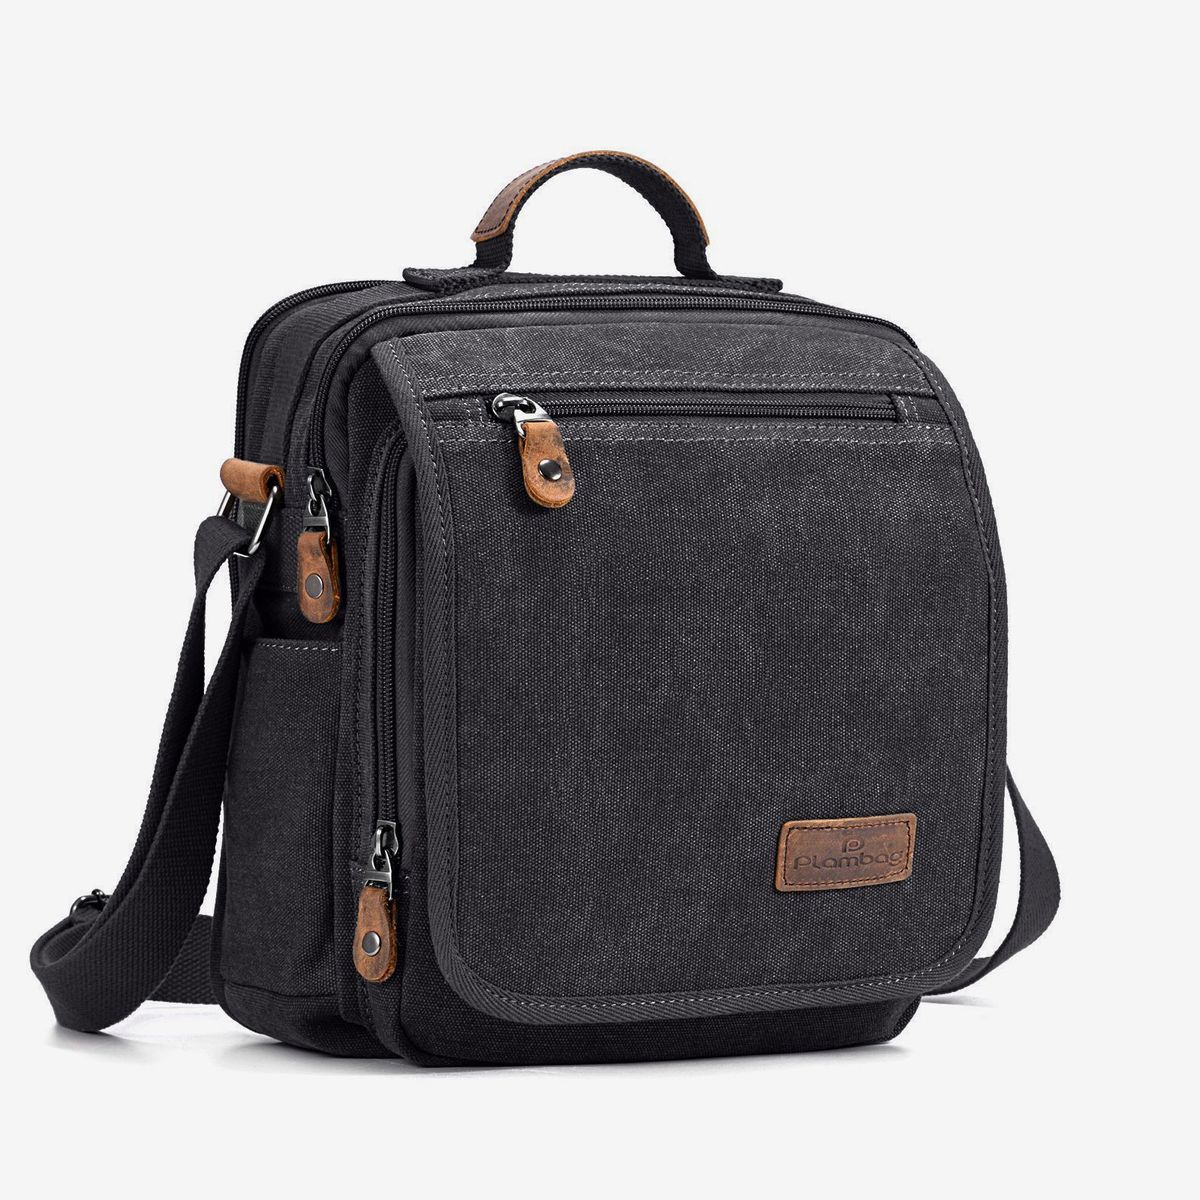 The Best Messenger Bags for Tech Travel and EDC 2022  Carryology   Exploring better ways to carry